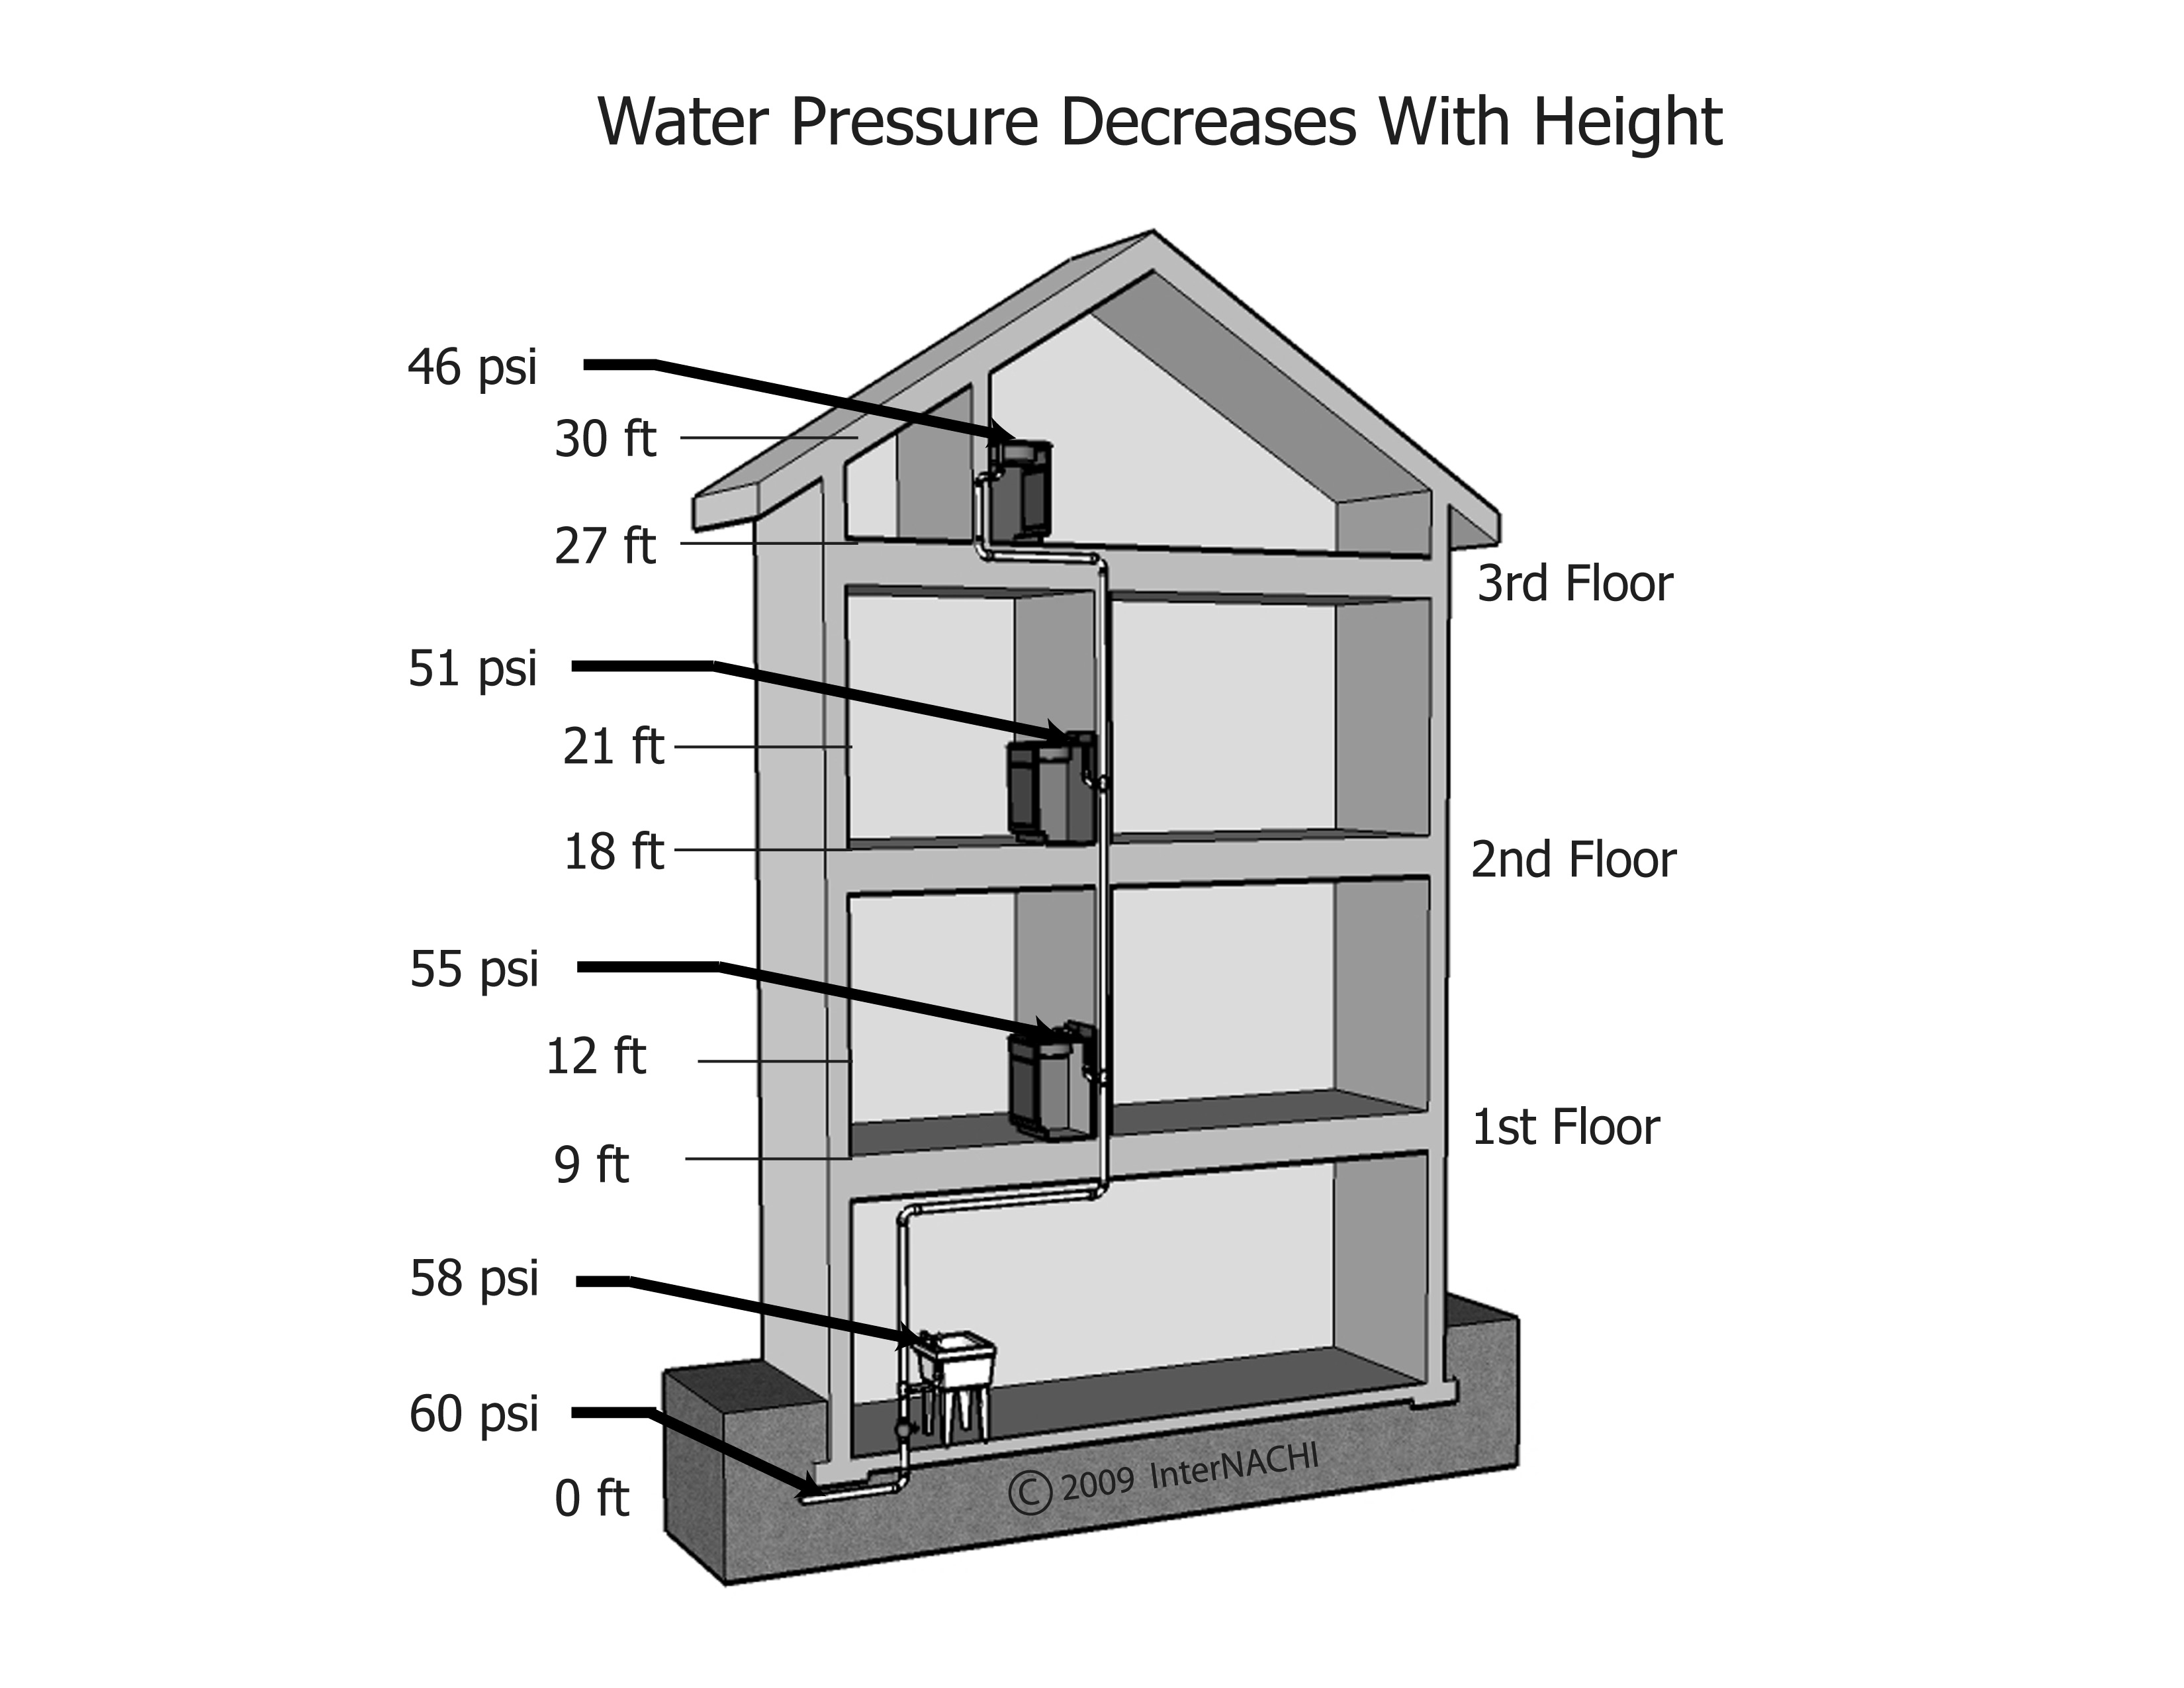 Water pressure decreases with height.